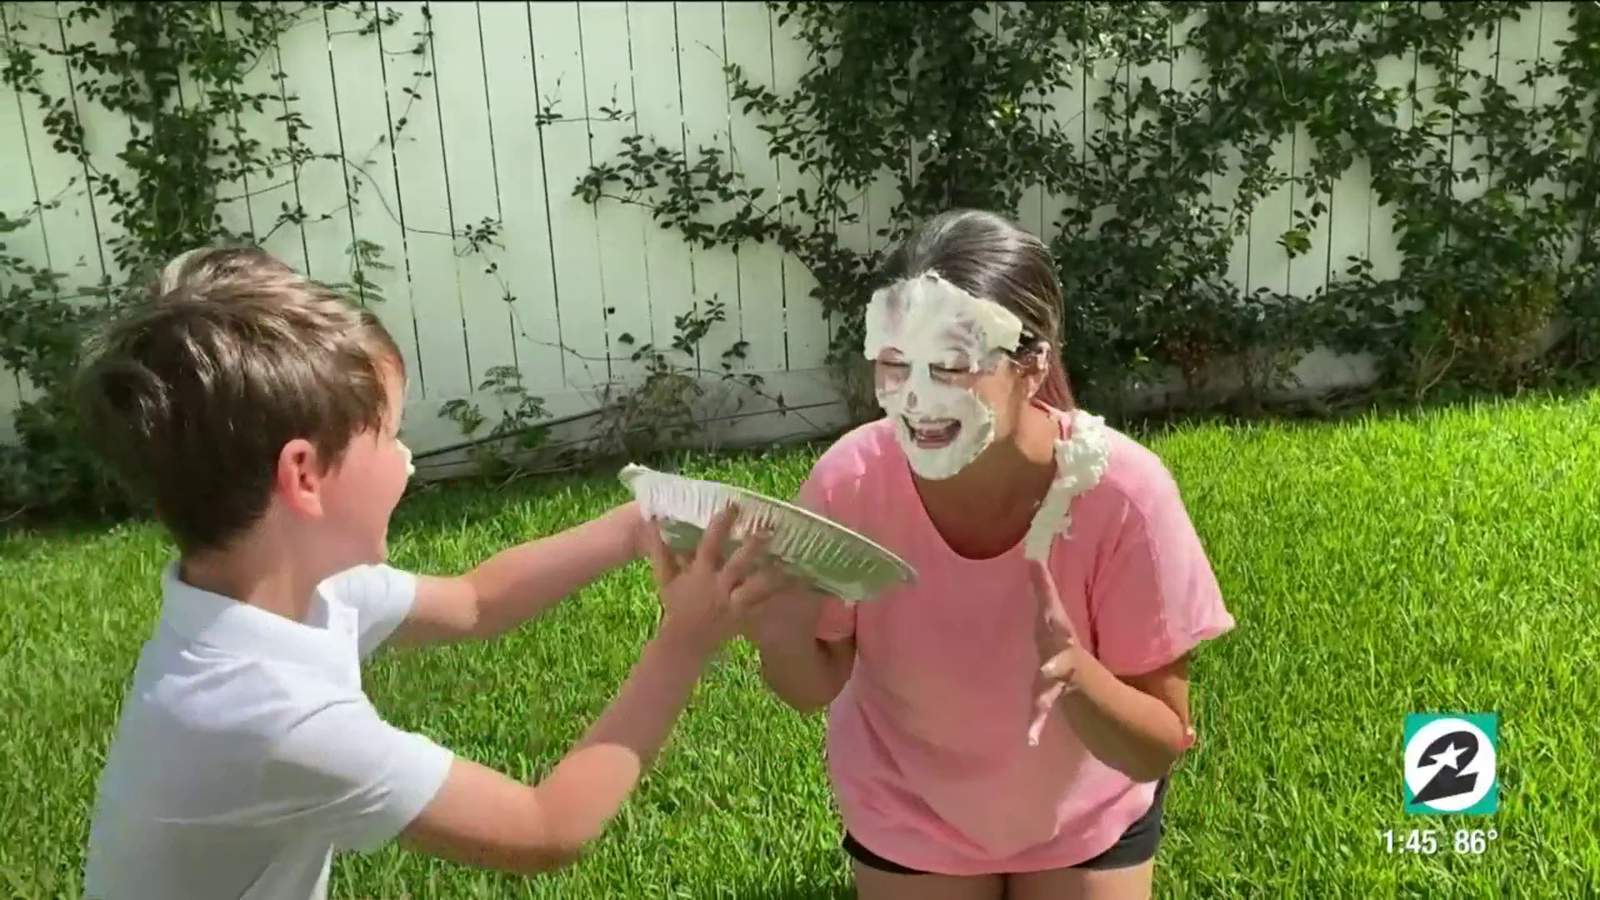 Camp For All is throwing a pie in your face for a good cause | HOUSTON LIFE | KPRC 2